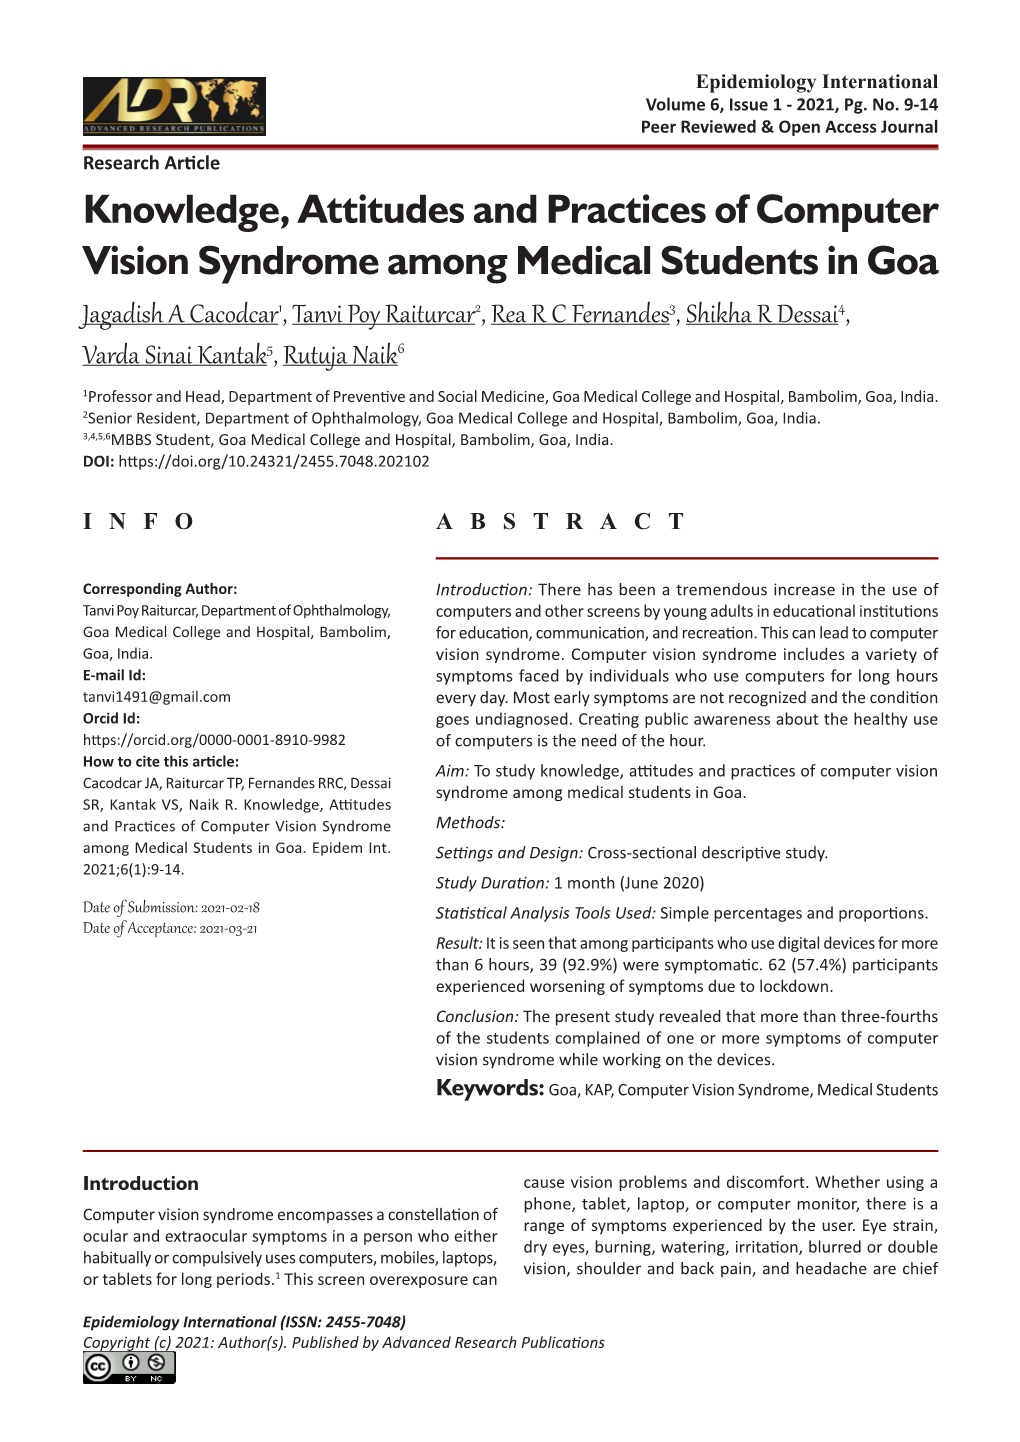 Knowledge, Attitudes and Practices of Computer Vision Syndrome Among